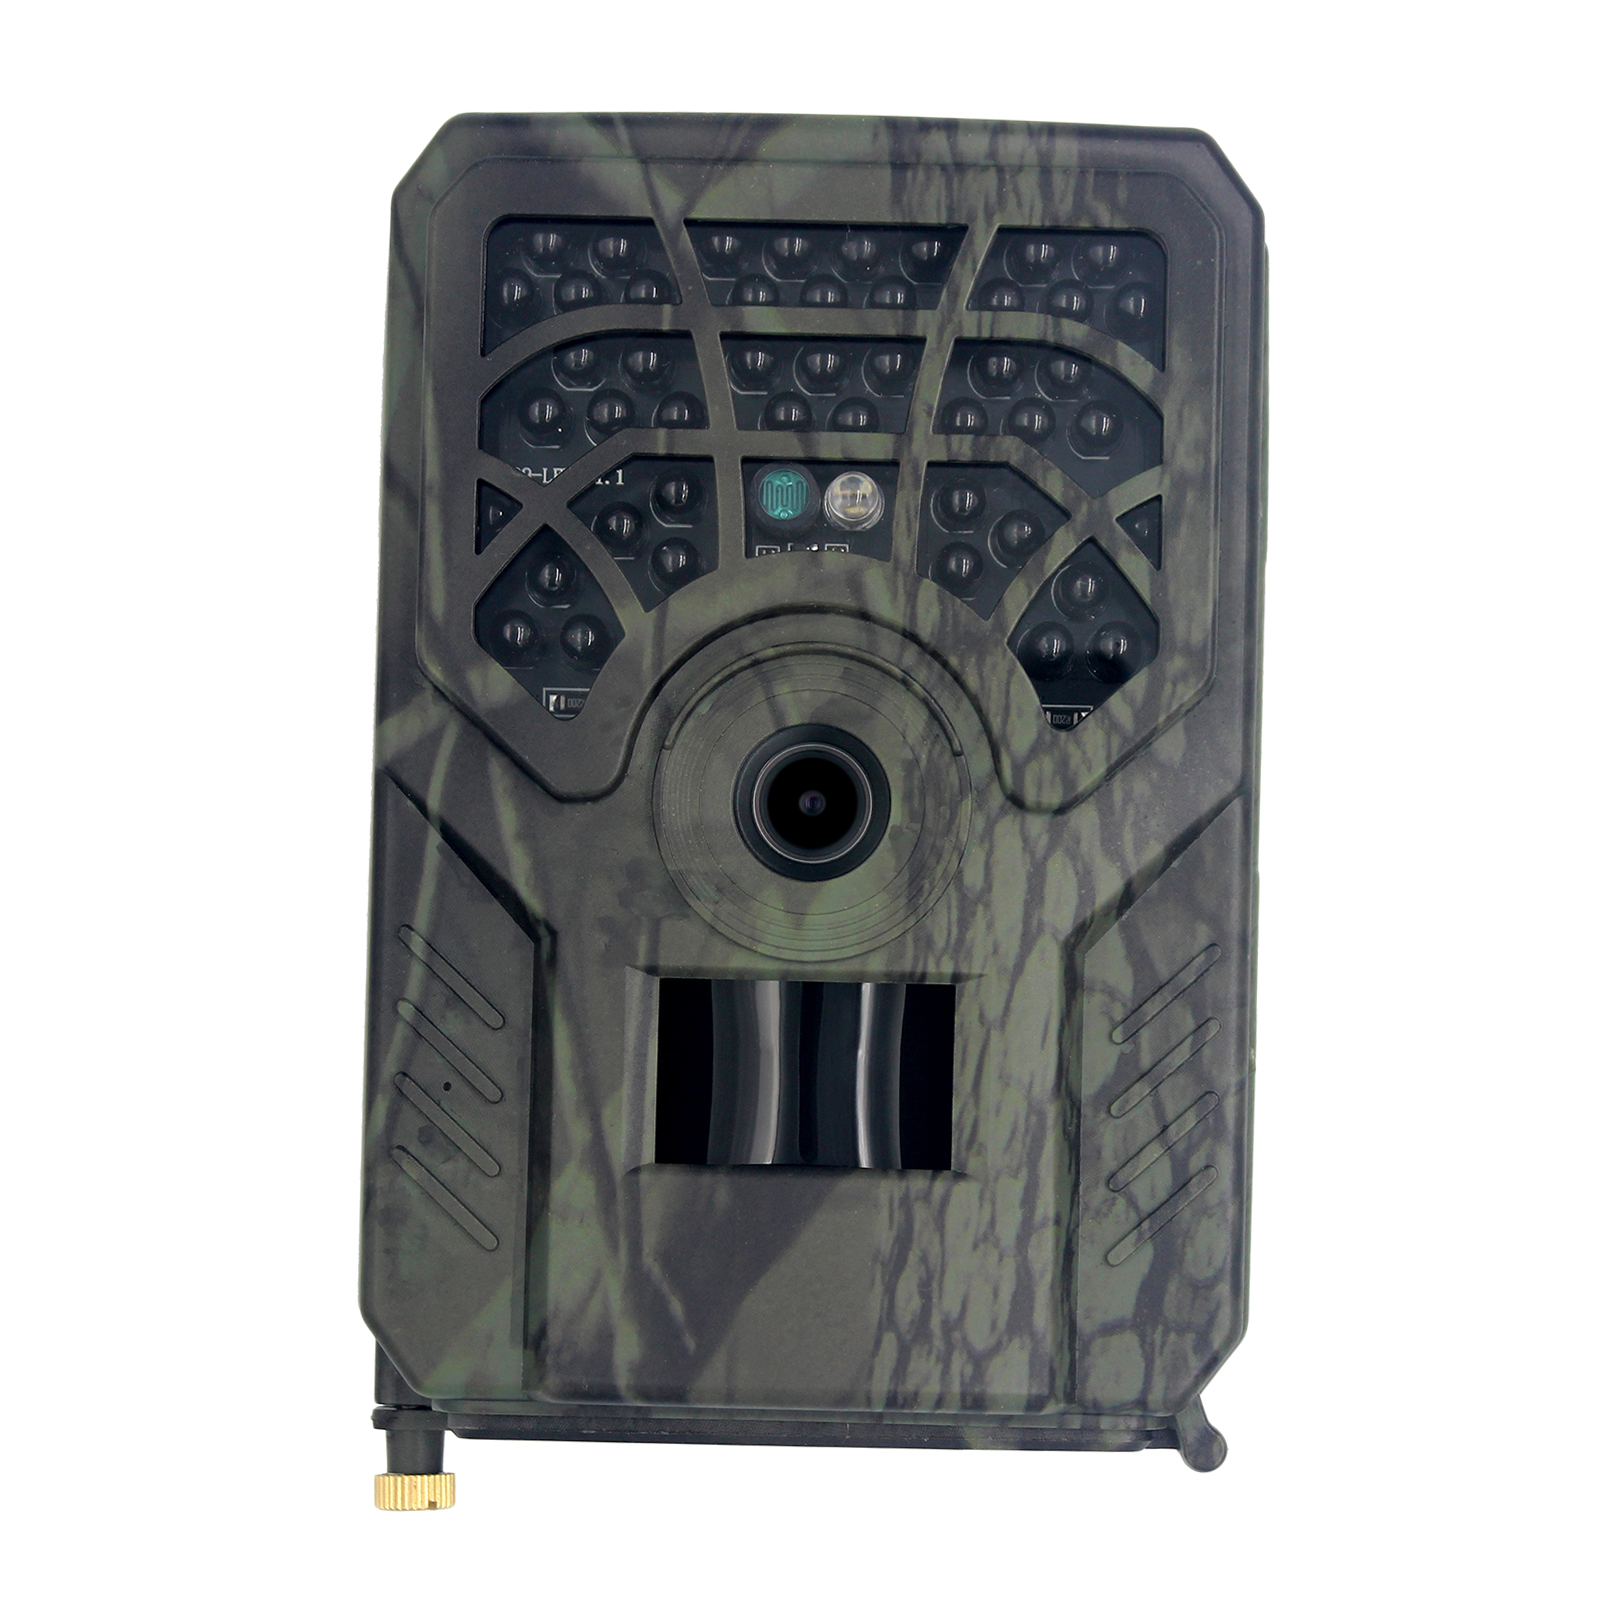 Upgrade PR-300C Trail Camera 720P Night Vision Outdoor Hunting Security Cam with IP54 Waterproof Wildlife 120° Wide Angle Lens Retail Box